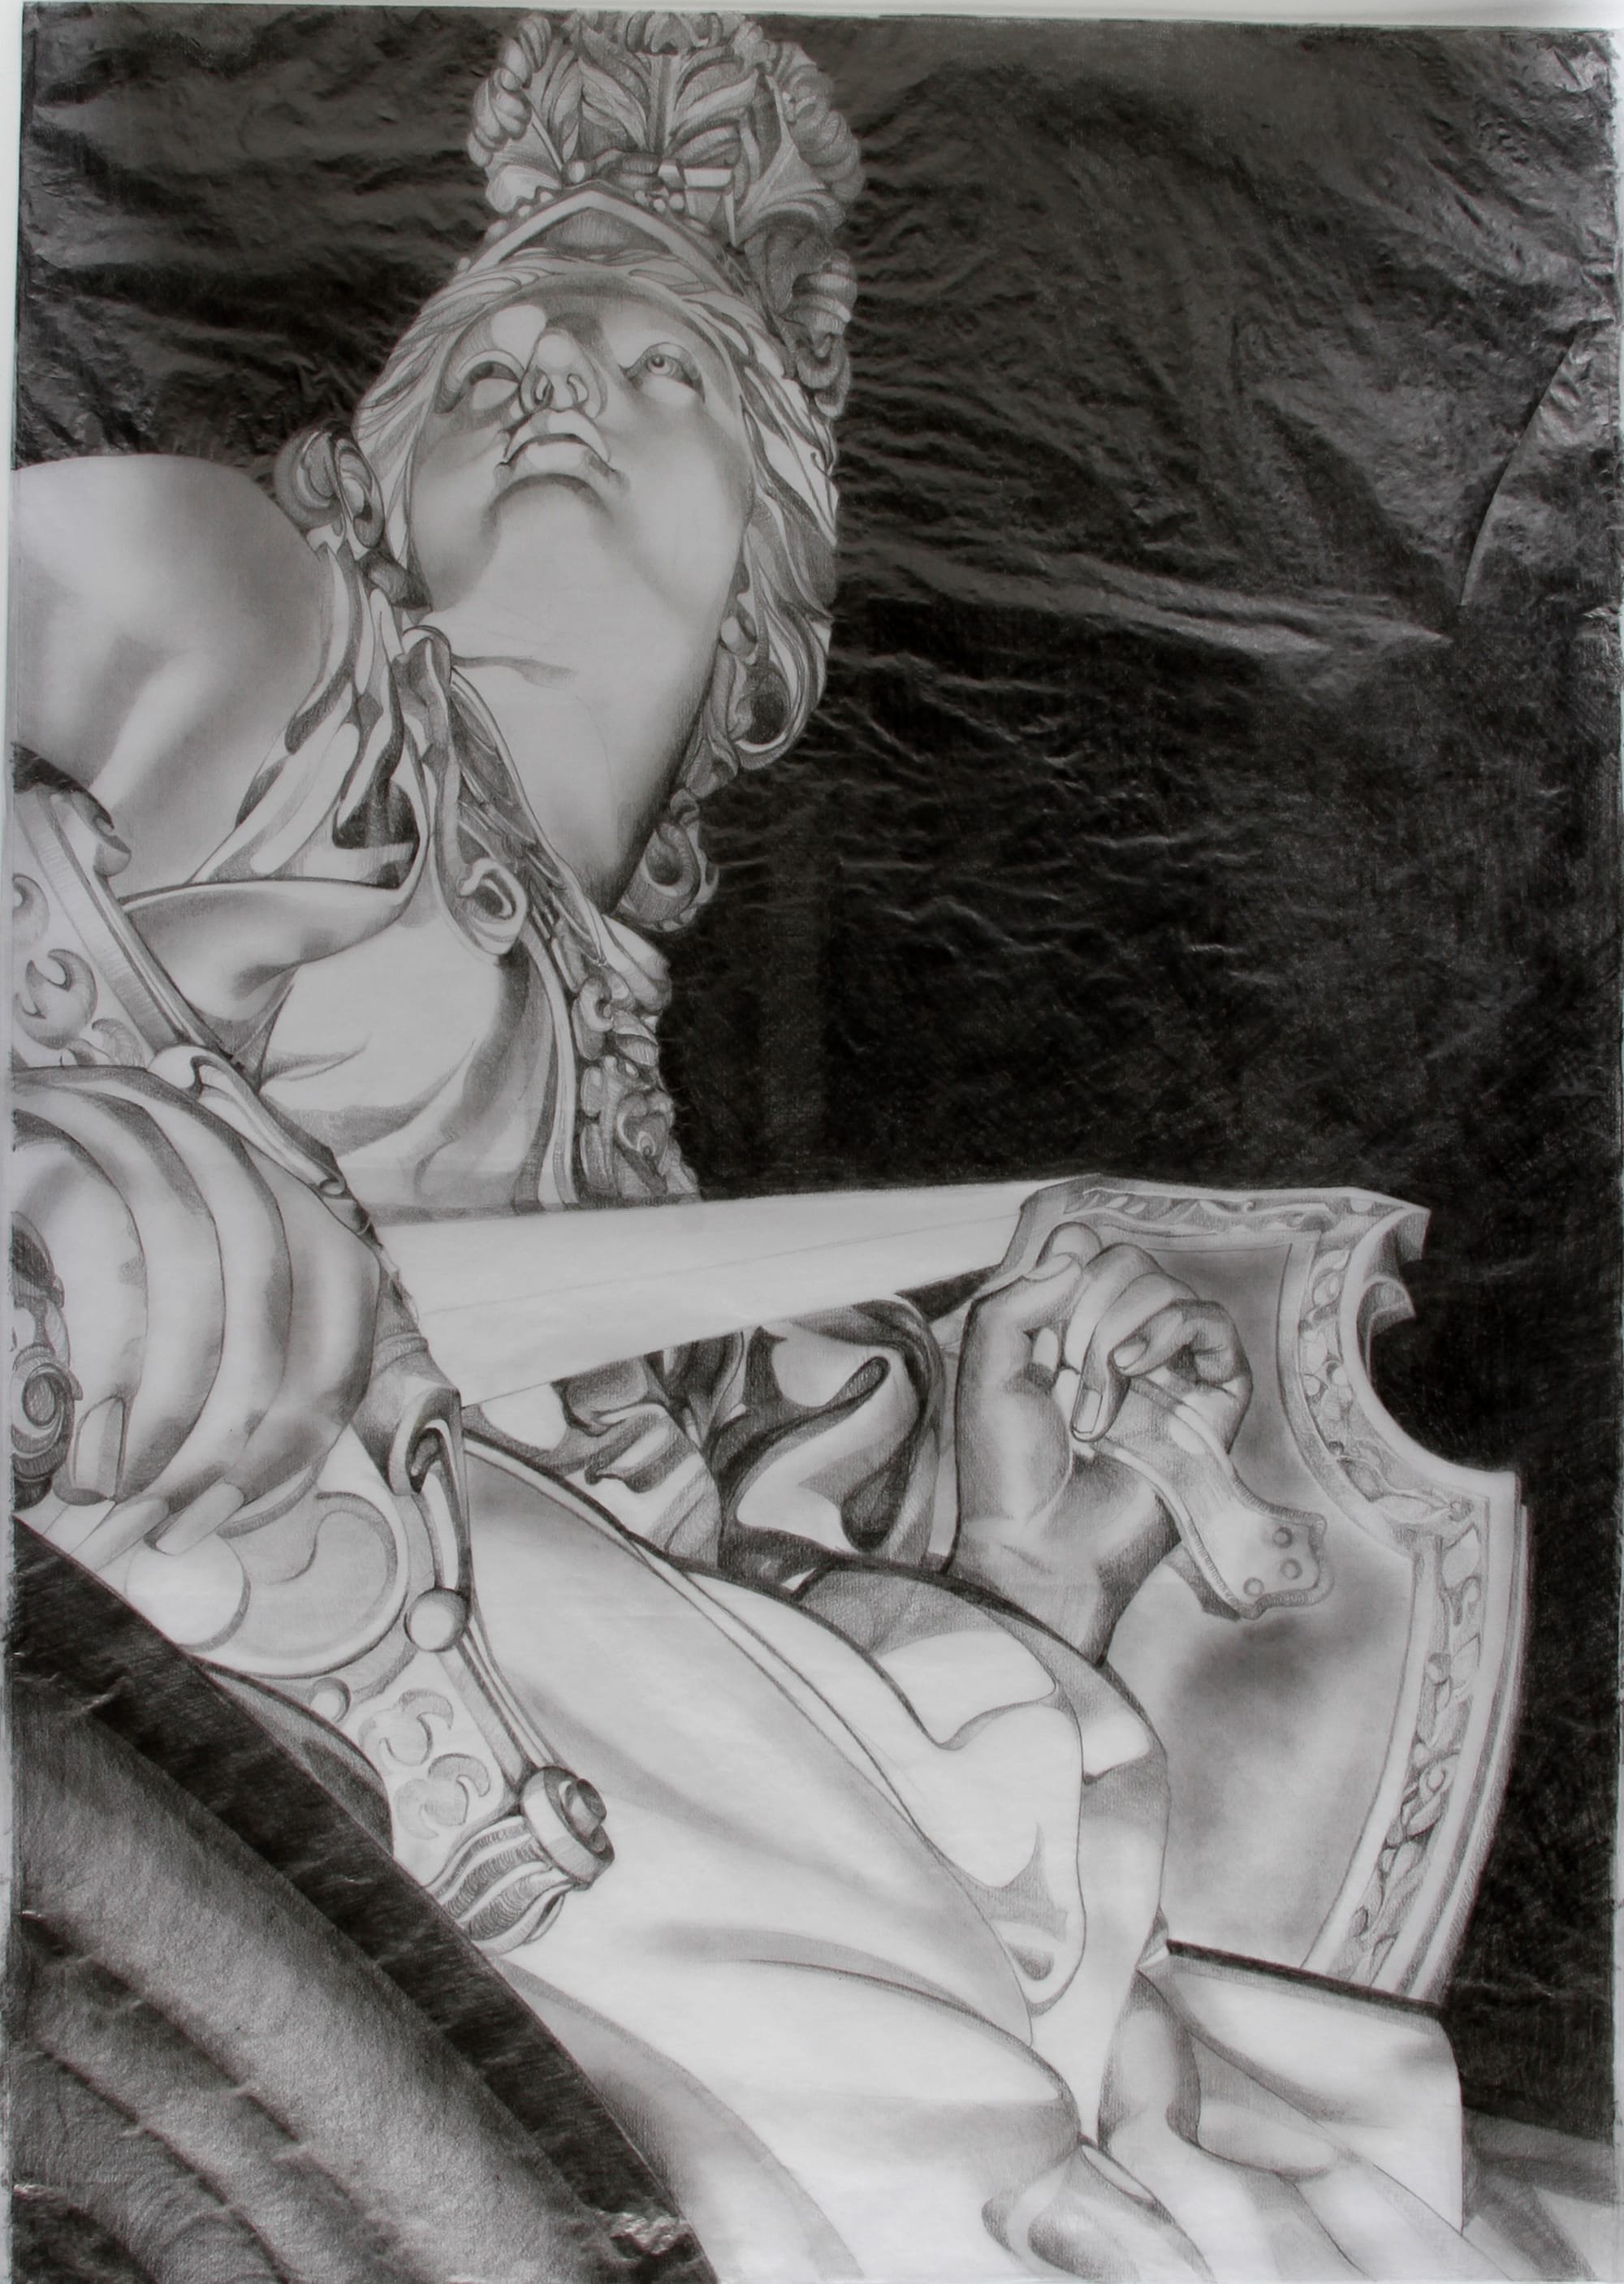 Study of Fortitude, H60 x W41.5 cms, Pencil on Tissue Paper, exhibited in a solo show in Hannover and Berlin, Germany